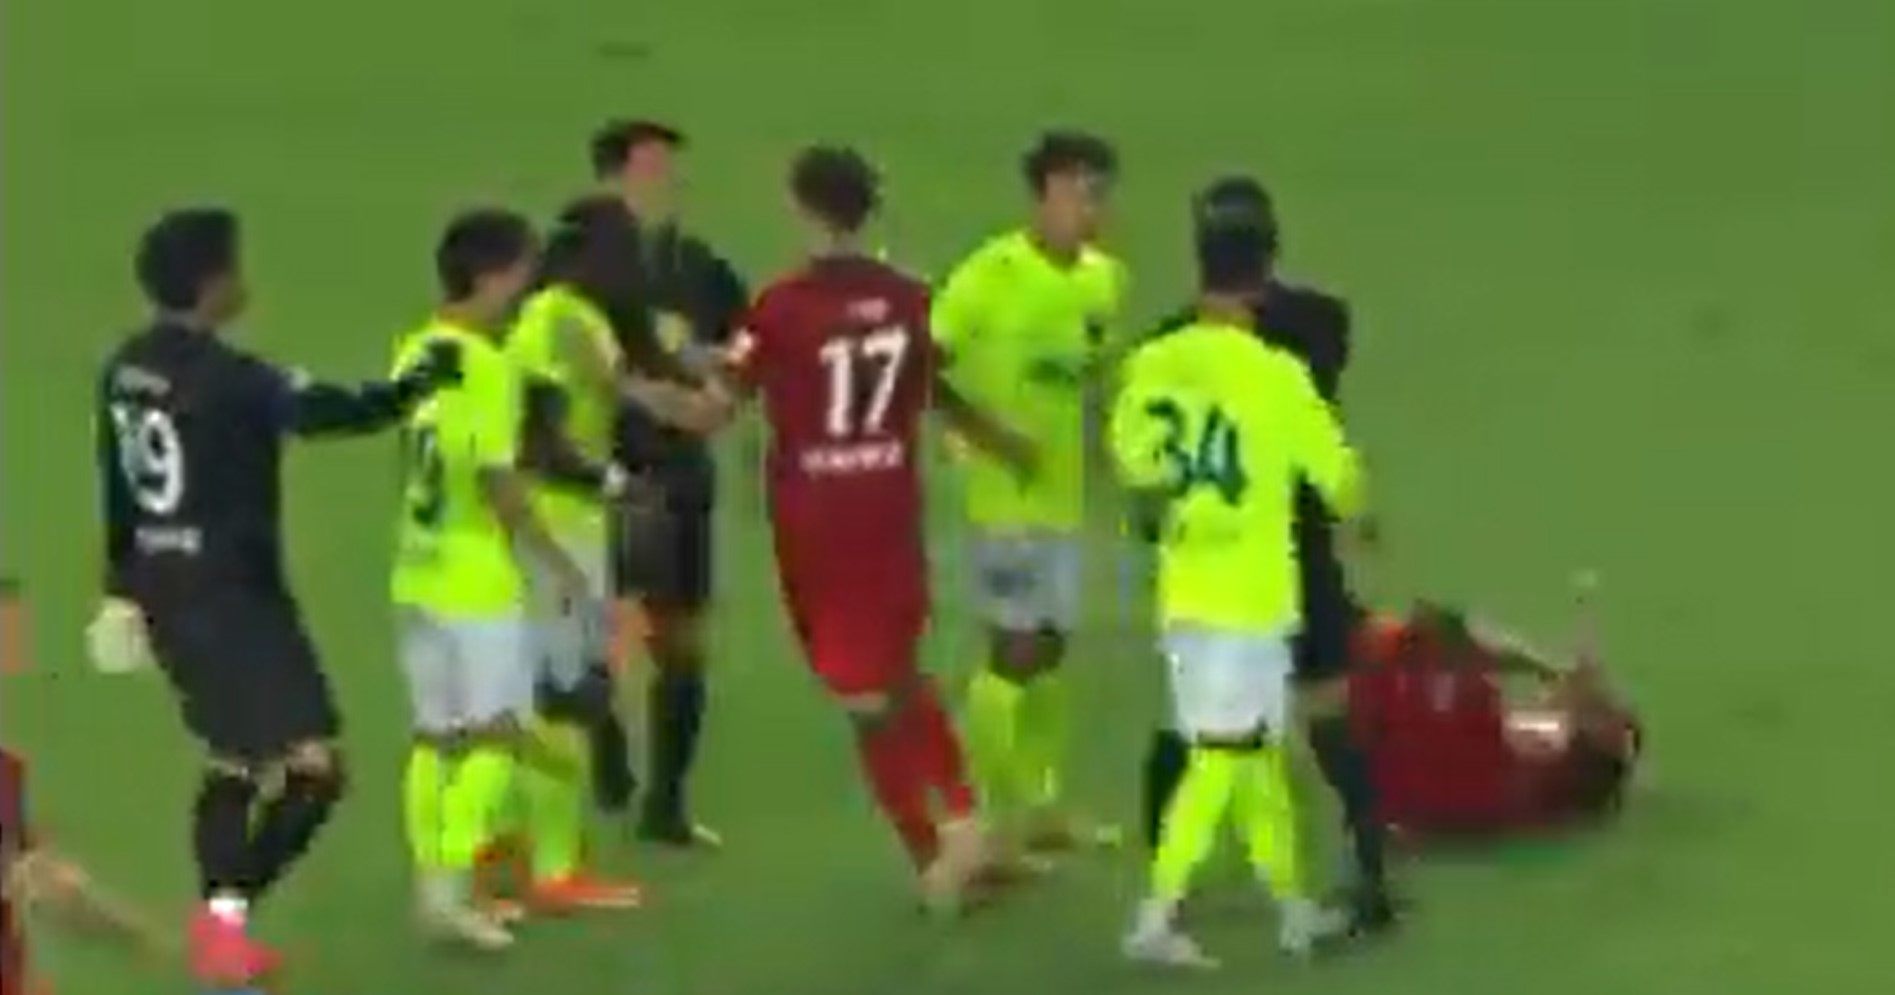 Henan’s Gu Cao collapses after being punched by Frank Acheampong of Shenzhen during a Chinese Super League match. Photo: Twitter/@ghanasoccernet